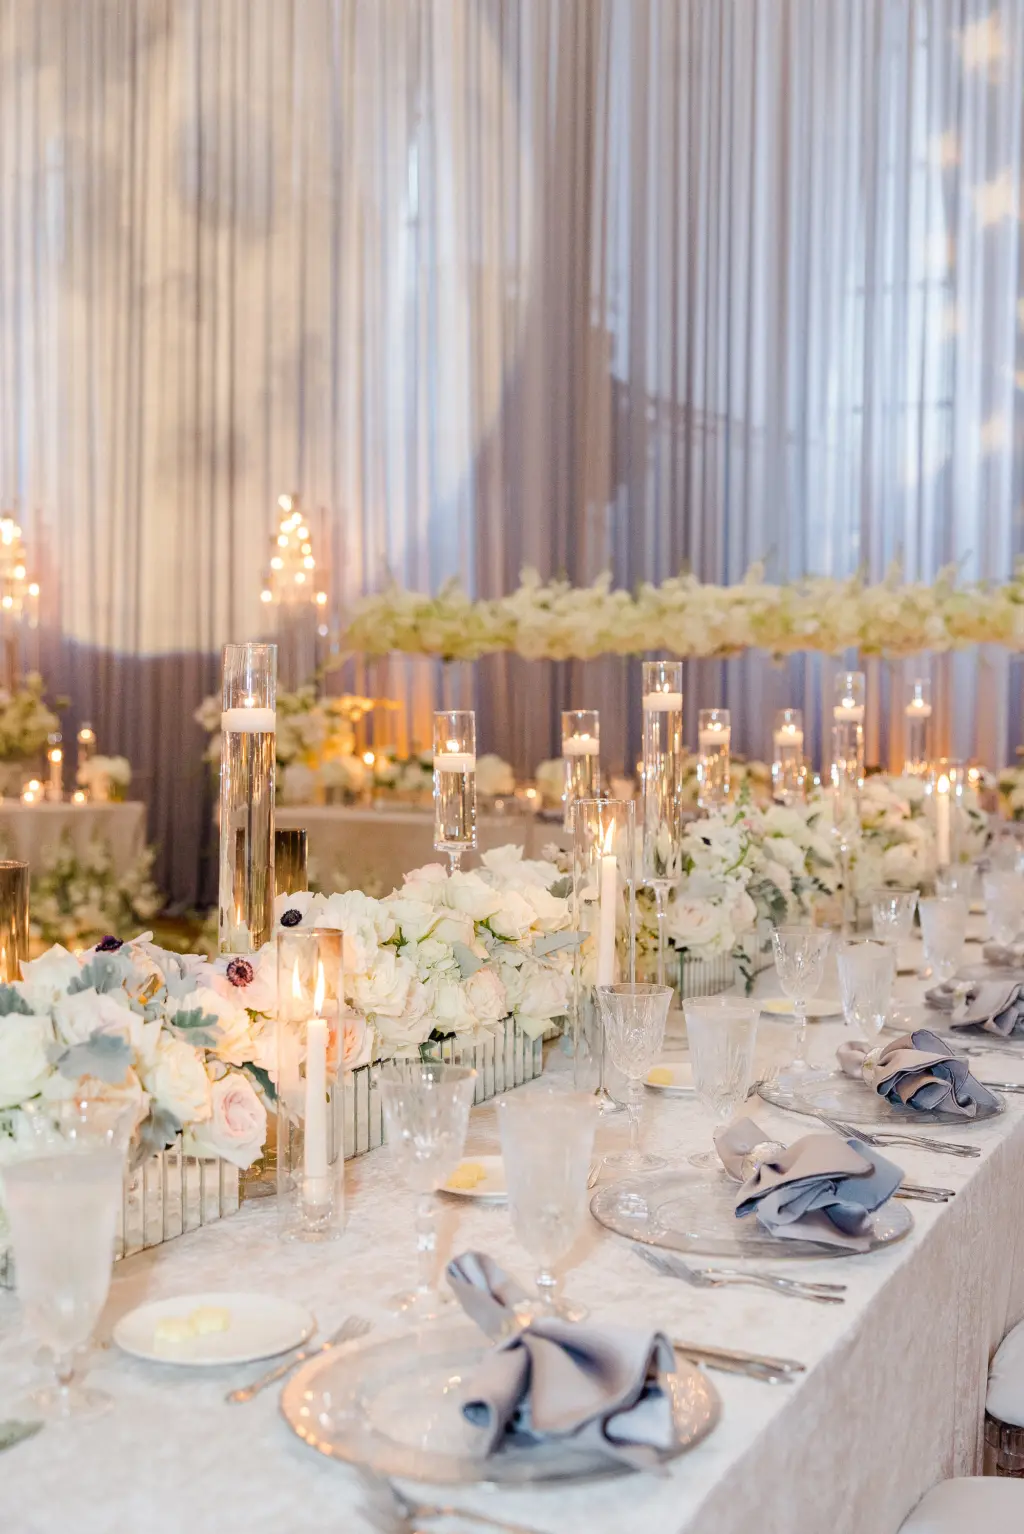 Whimsical White Wedding Reception Centerpiece Inspiration | Long Feasting Tables with Floating Candles, and Rose Table Top Flower Arrangement Ideas